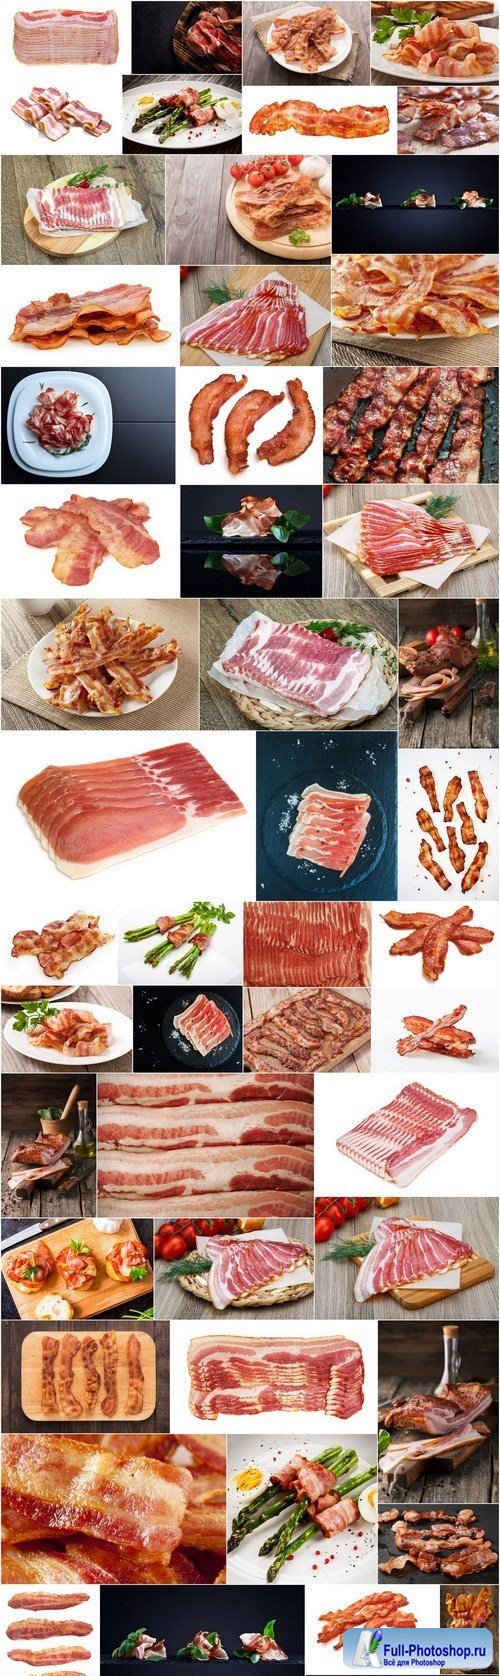 Tasty Bacon - Set of 53xUHQ JPEG Professional Stock Images